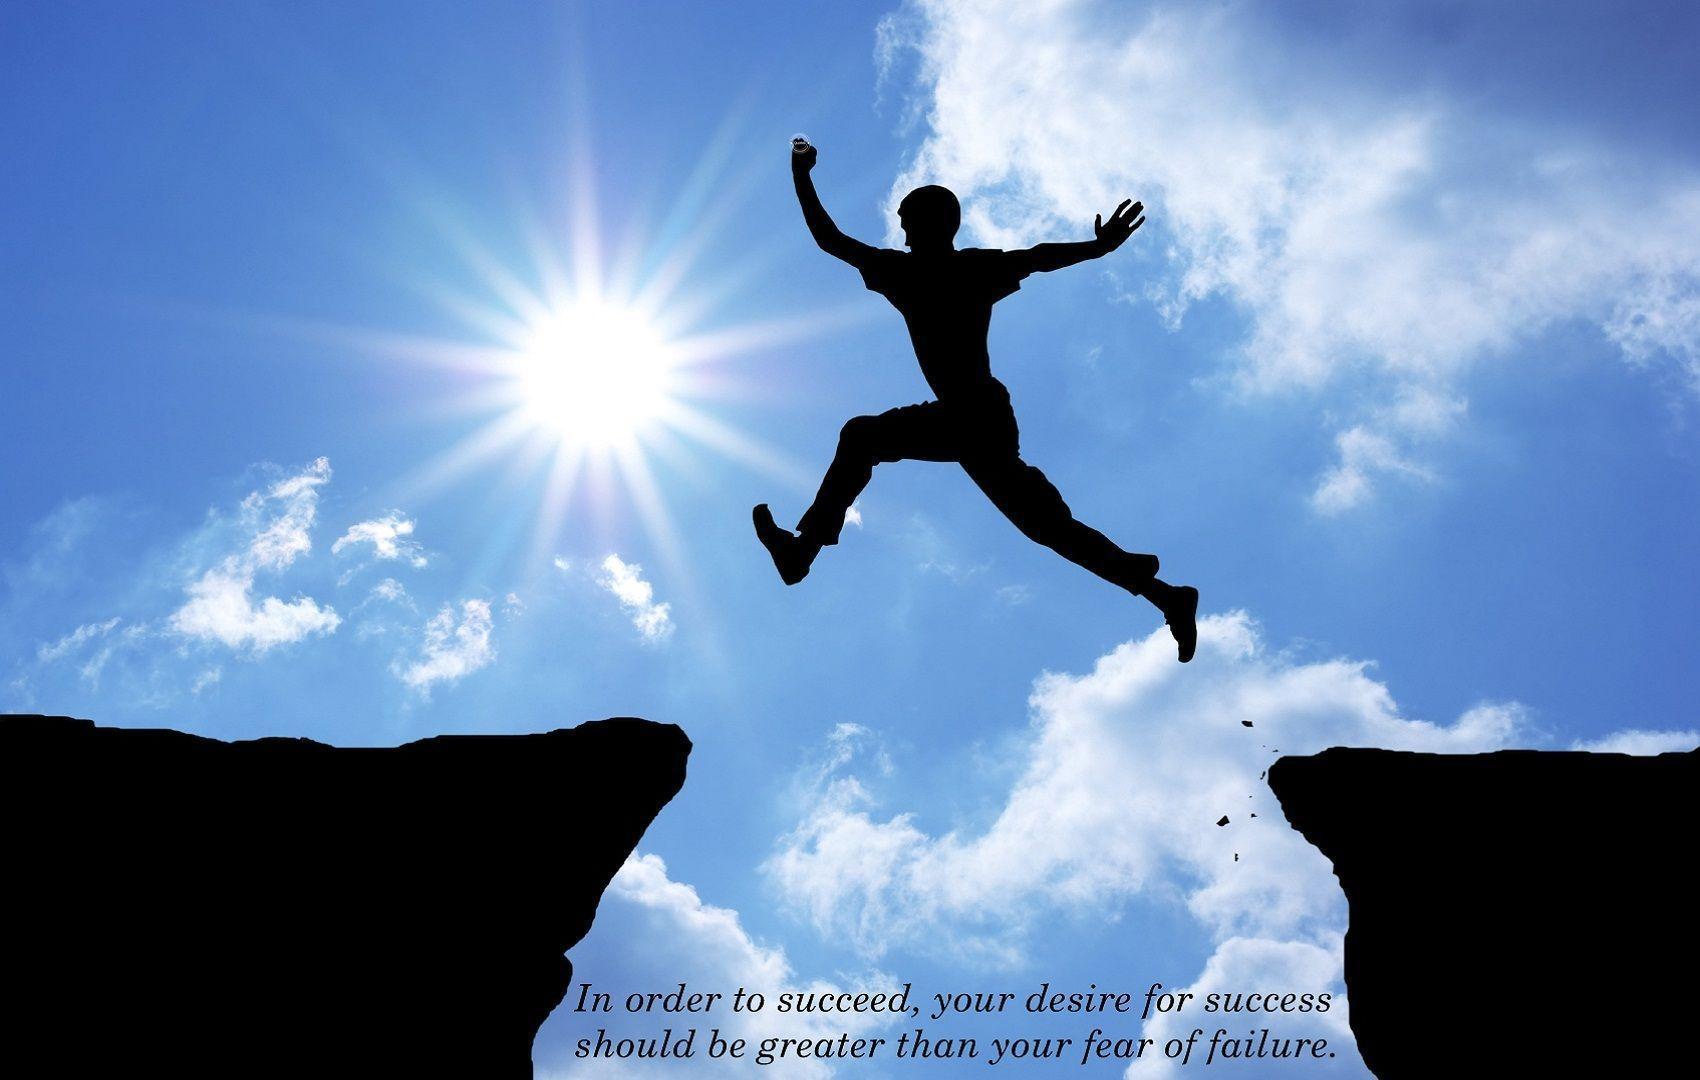  A black figure jumps over a cliff with the sun shining brightly in the background and the text "In order to succeed, your desire for success should be greater than your fear of failure."